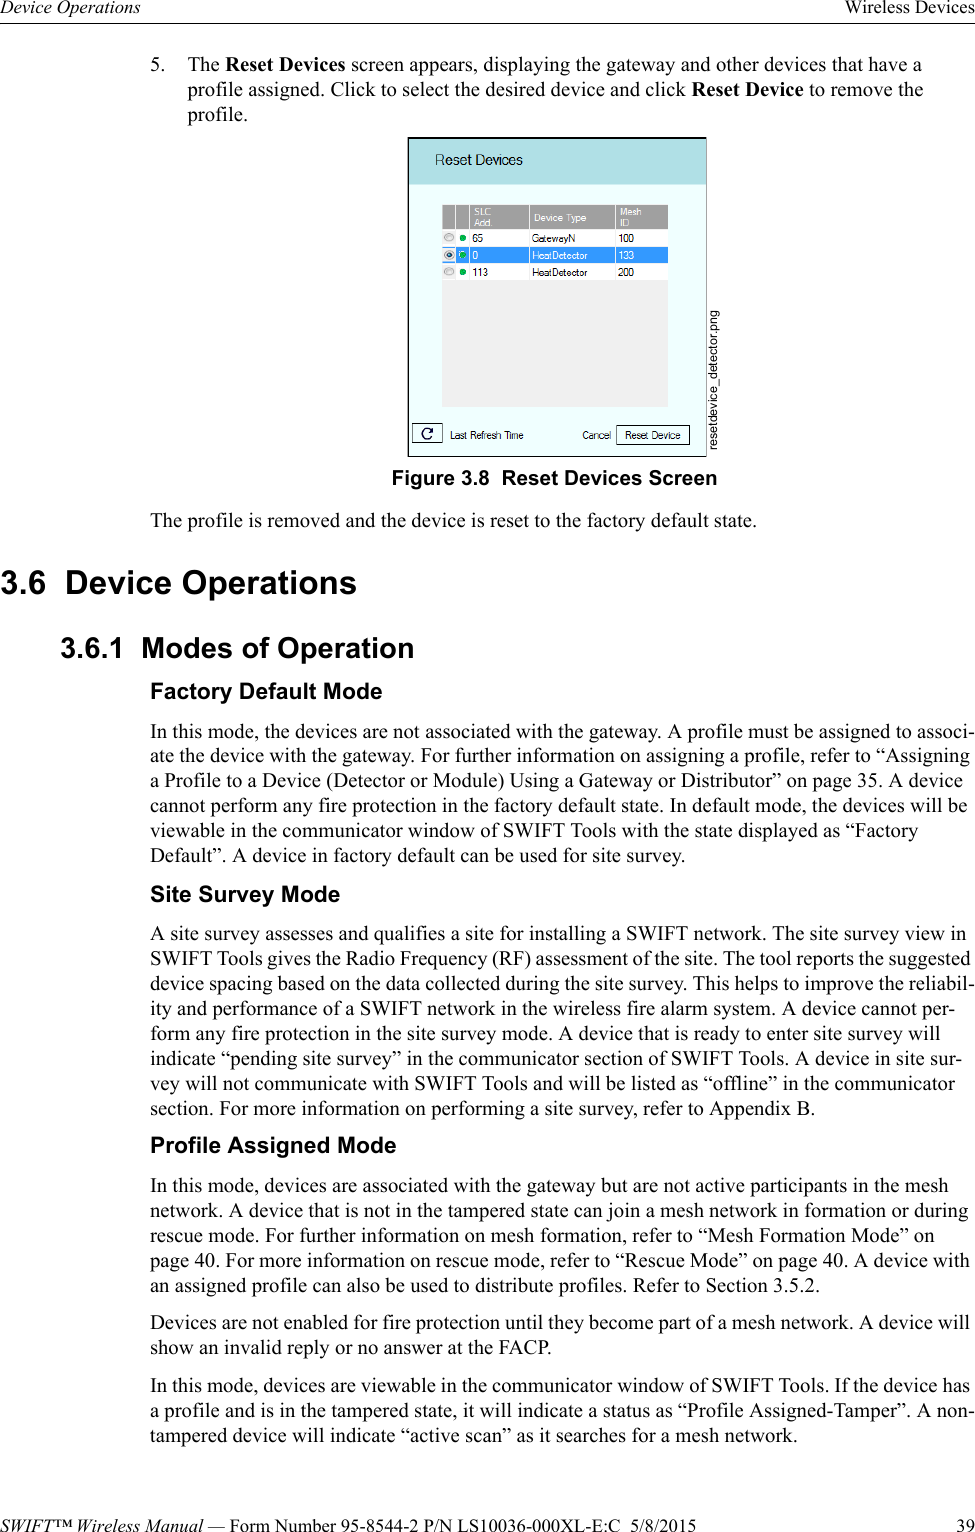 SWIFT™ Wireless Manual — Form Number 95-8544-2 P/N LS10036-000XL-E:C  5/8/2015  39Device Operations Wireless Devices5. The Reset Devices screen appears, displaying the gateway and other devices that have a profile assigned. Click to select the desired device and click Reset Device to remove the profile.The profile is removed and the device is reset to the factory default state.3.6  Device Operations3.6.1  Modes of OperationFactory Default ModeIn this mode, the devices are not associated with the gateway. A profile must be assigned to associ-ate the device with the gateway. For further information on assigning a profile, refer to “Assigning a Profile to a Device (Detector or Module) Using a Gateway or Distributor” on page 35. A device cannot perform any fire protection in the factory default state. In default mode, the devices will be viewable in the communicator window of SWIFT Tools with the state displayed as “Factory Default”. A device in factory default can be used for site survey.Site Survey ModeA site survey assesses and qualifies a site for installing a SWIFT network. The site survey view in SWIFT Tools gives the Radio Frequency (RF) assessment of the site. The tool reports the suggested device spacing based on the data collected during the site survey. This helps to improve the reliabil-ity and performance of a SWIFT network in the wireless fire alarm system. A device cannot per-form any fire protection in the site survey mode. A device that is ready to enter site survey will indicate “pending site survey” in the communicator section of SWIFT Tools. A device in site sur-vey will not communicate with SWIFT Tools and will be listed as “offline” in the communicator section. For more information on performing a site survey, refer to Appendix B.Profile Assigned ModeIn this mode, devices are associated with the gateway but are not active participants in the mesh network. A device that is not in the tampered state can join a mesh network in formation or during rescue mode. For further information on mesh formation, refer to “Mesh Formation Mode” on page 40. For more information on rescue mode, refer to “Rescue Mode” on page 40. A device with an assigned profile can also be used to distribute profiles. Refer to Section 3.5.2. Devices are not enabled for fire protection until they become part of a mesh network. A device will show an invalid reply or no answer at the FACP. In this mode, devices are viewable in the communicator window of SWIFT Tools. If the device has a profile and is in the tampered state, it will indicate a status as “Profile Assigned-Tamper”. A non-tampered device will indicate “active scan” as it searches for a mesh network.resetdevice_detector.pngFigure 3.8  Reset Devices Screen